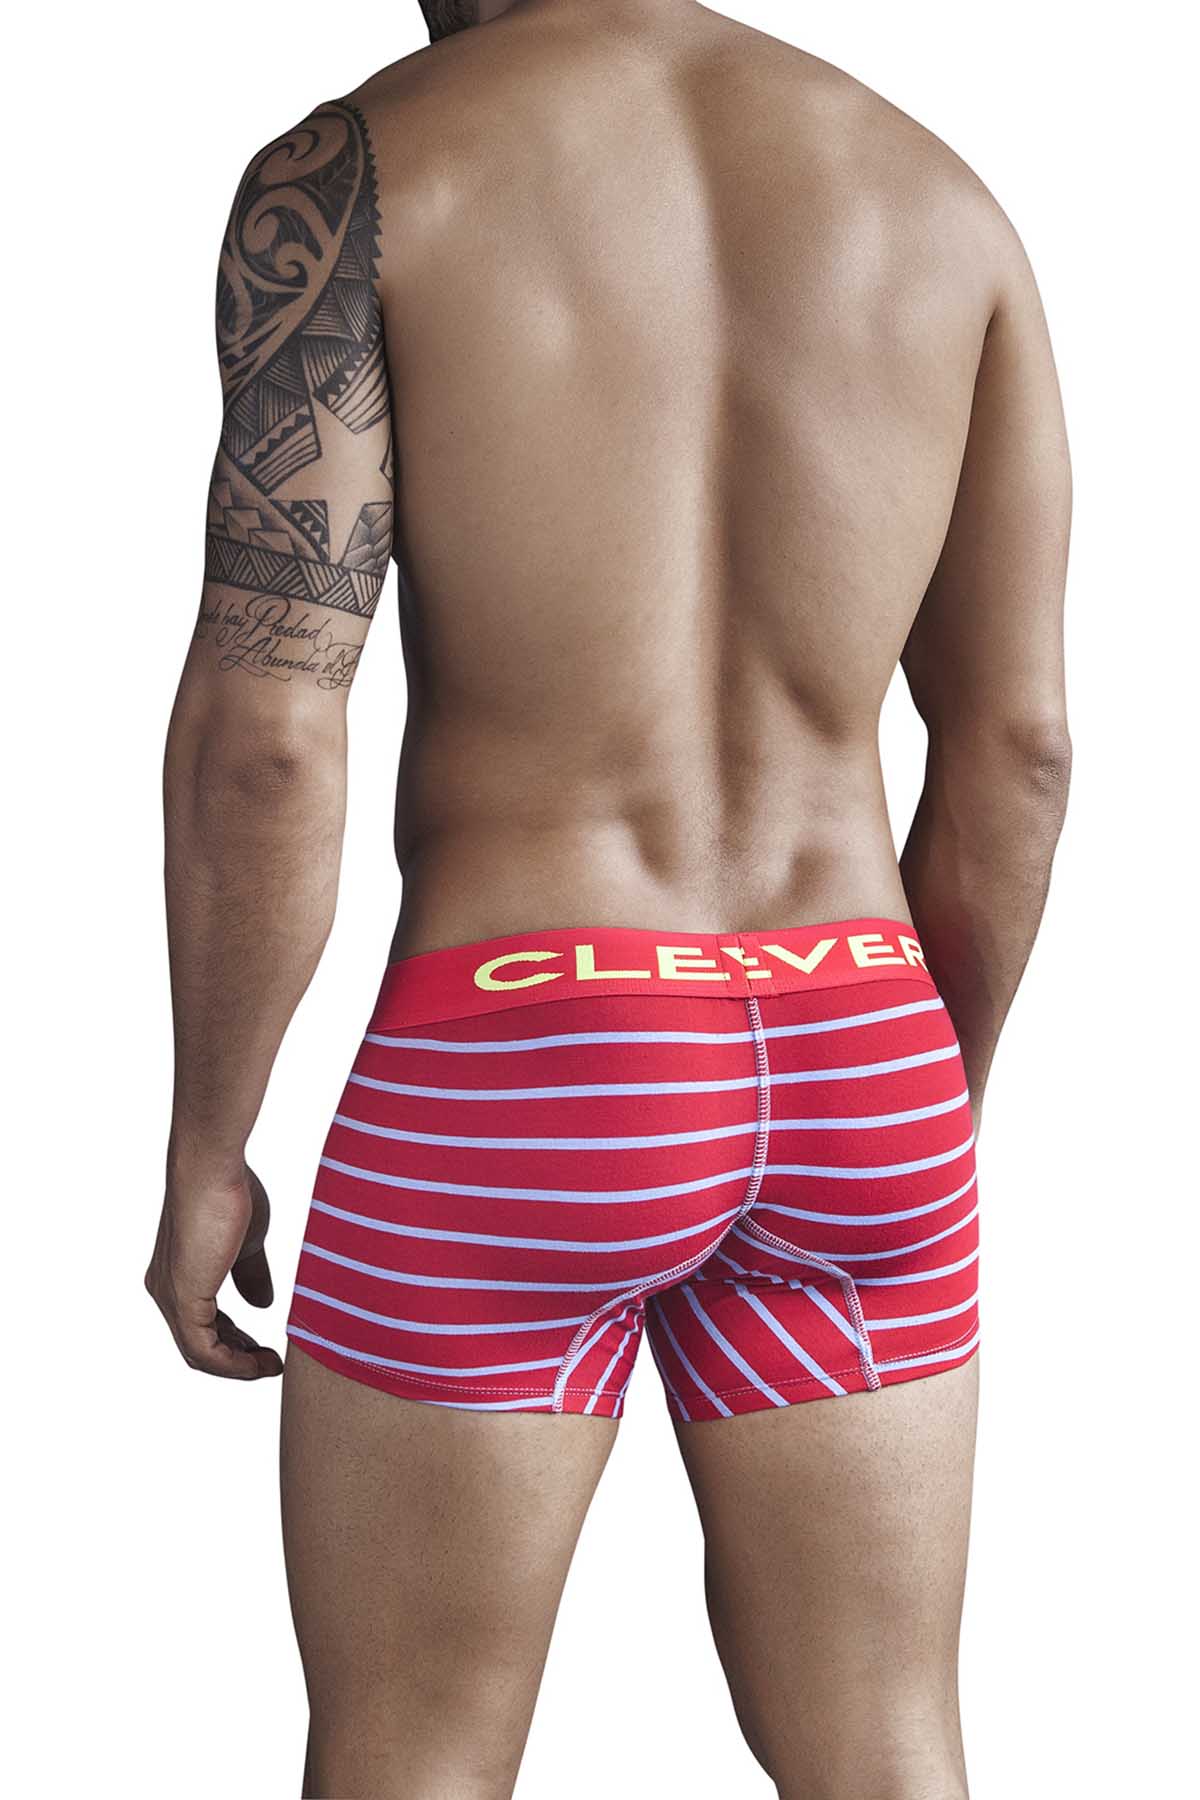 Clever Red Mayan Pantheon Boxer